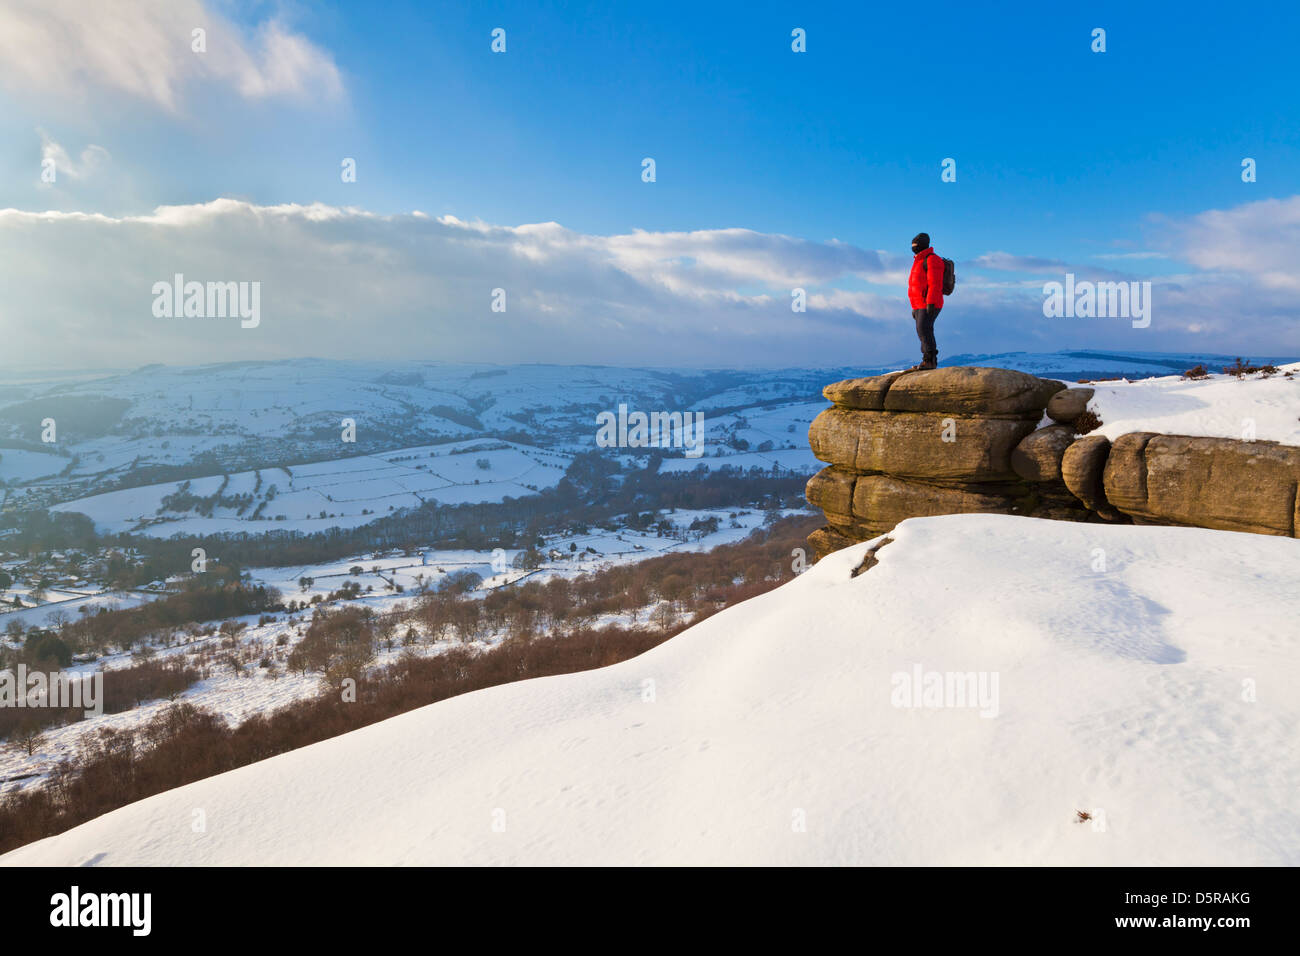 Hiker in snow covered peaks on Curbar Edge Peak District National Park Derbyshire England GB UK EU Europe Stock Photo